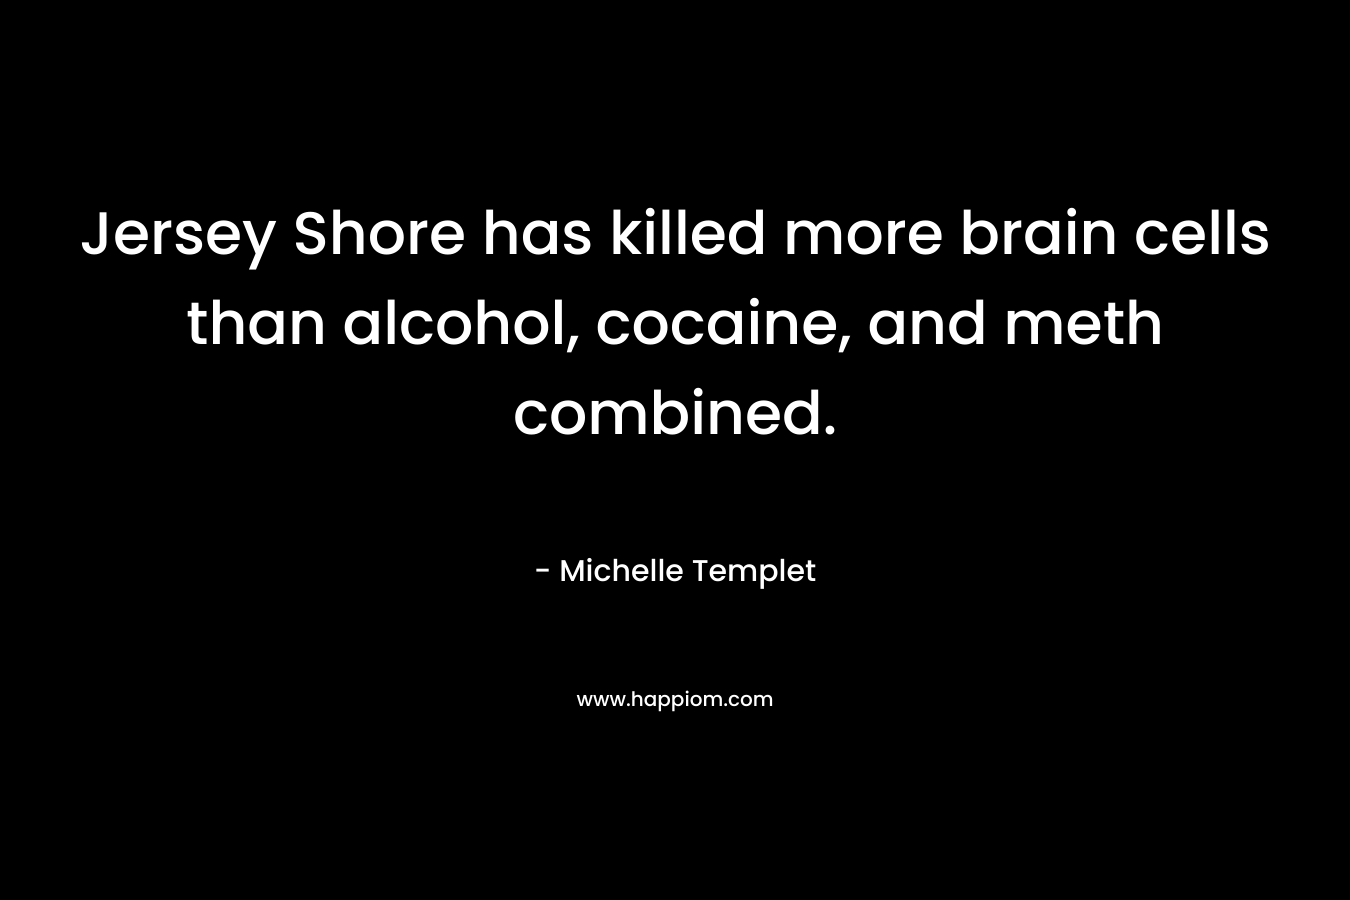 Jersey Shore has killed more brain cells than alcohol, cocaine, and meth combined.